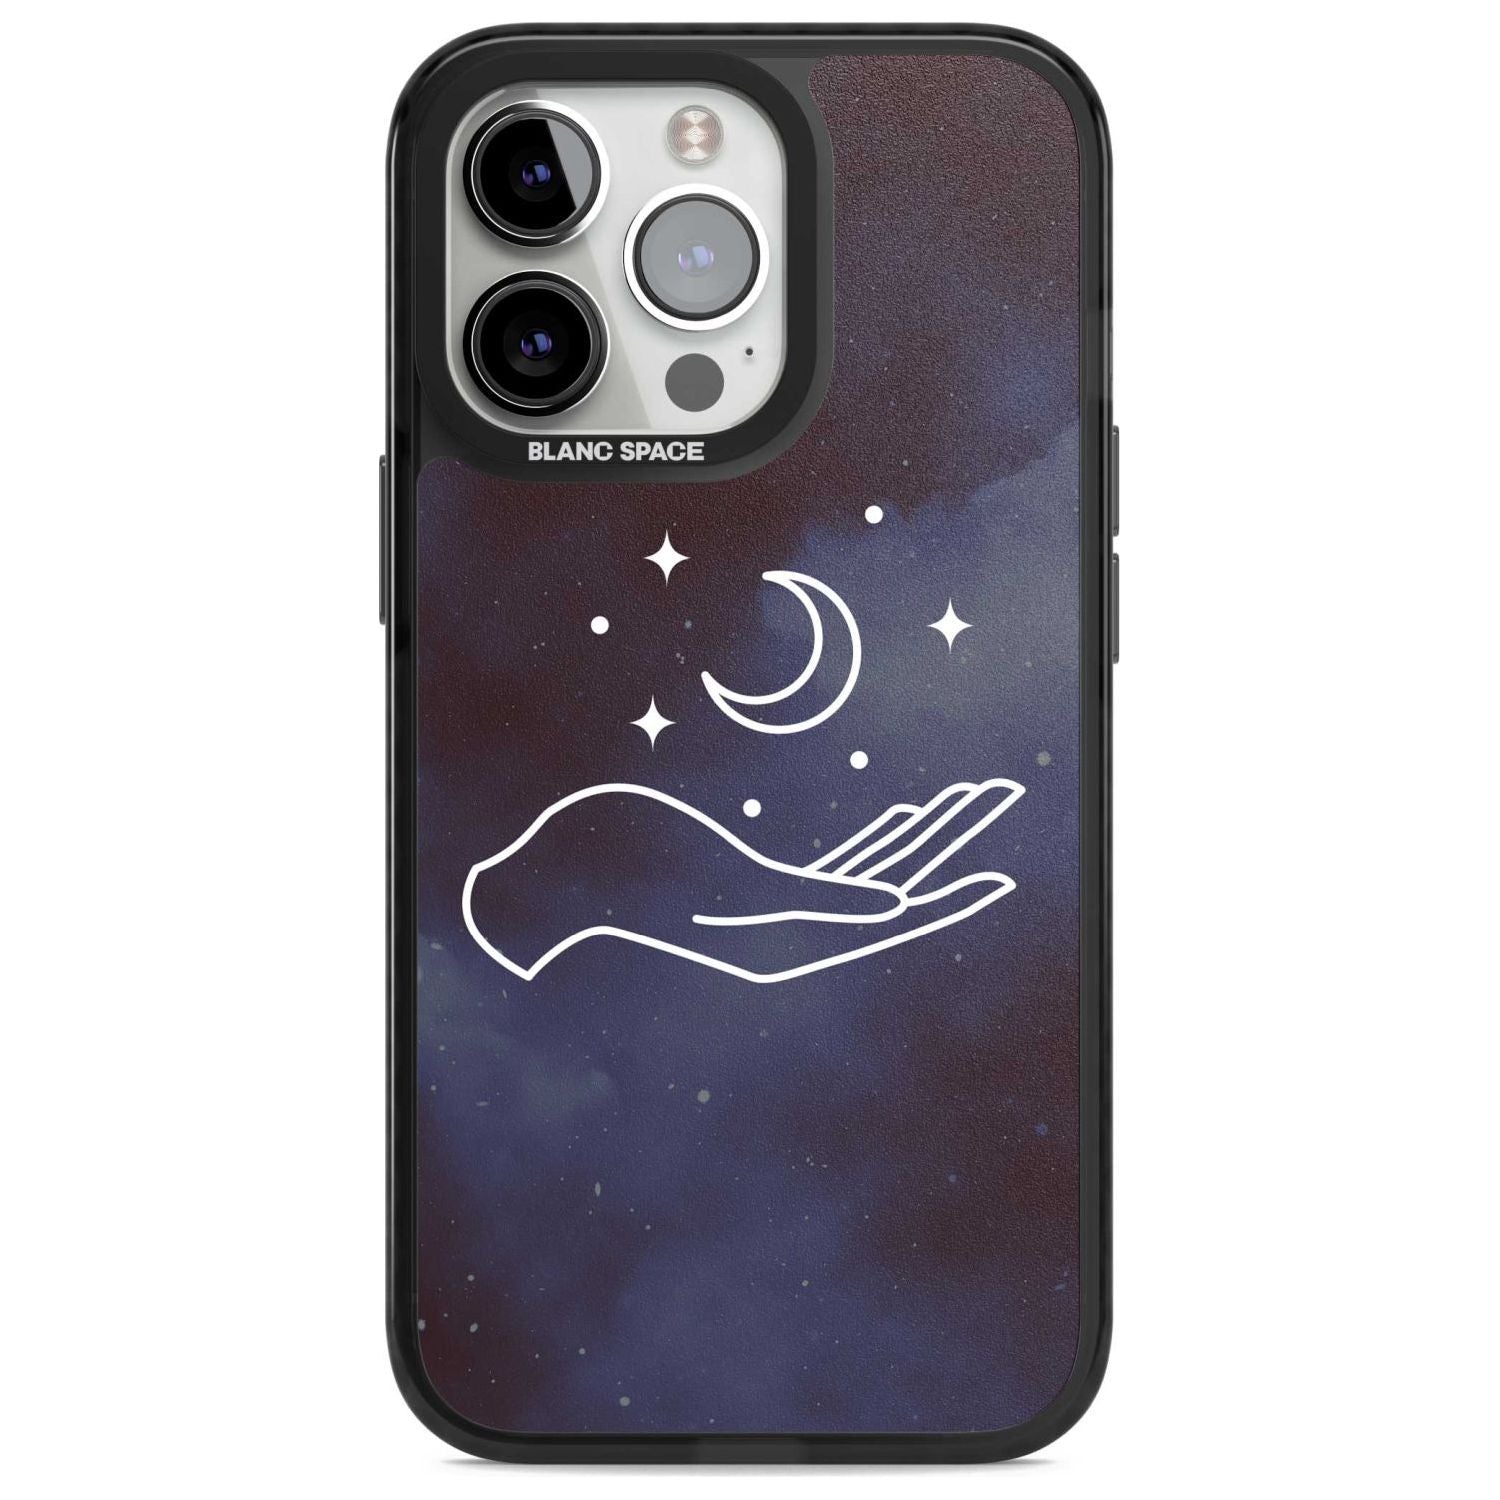 Floating Moon Above Hand Phone Case iPhone 15 Pro Max / Magsafe Black Impact Case,iPhone 15 Pro / Magsafe Black Impact Case,iPhone 14 Pro Max / Magsafe Black Impact Case,iPhone 14 Pro / Magsafe Black Impact Case,iPhone 13 Pro / Magsafe Black Impact Case Blanc Space